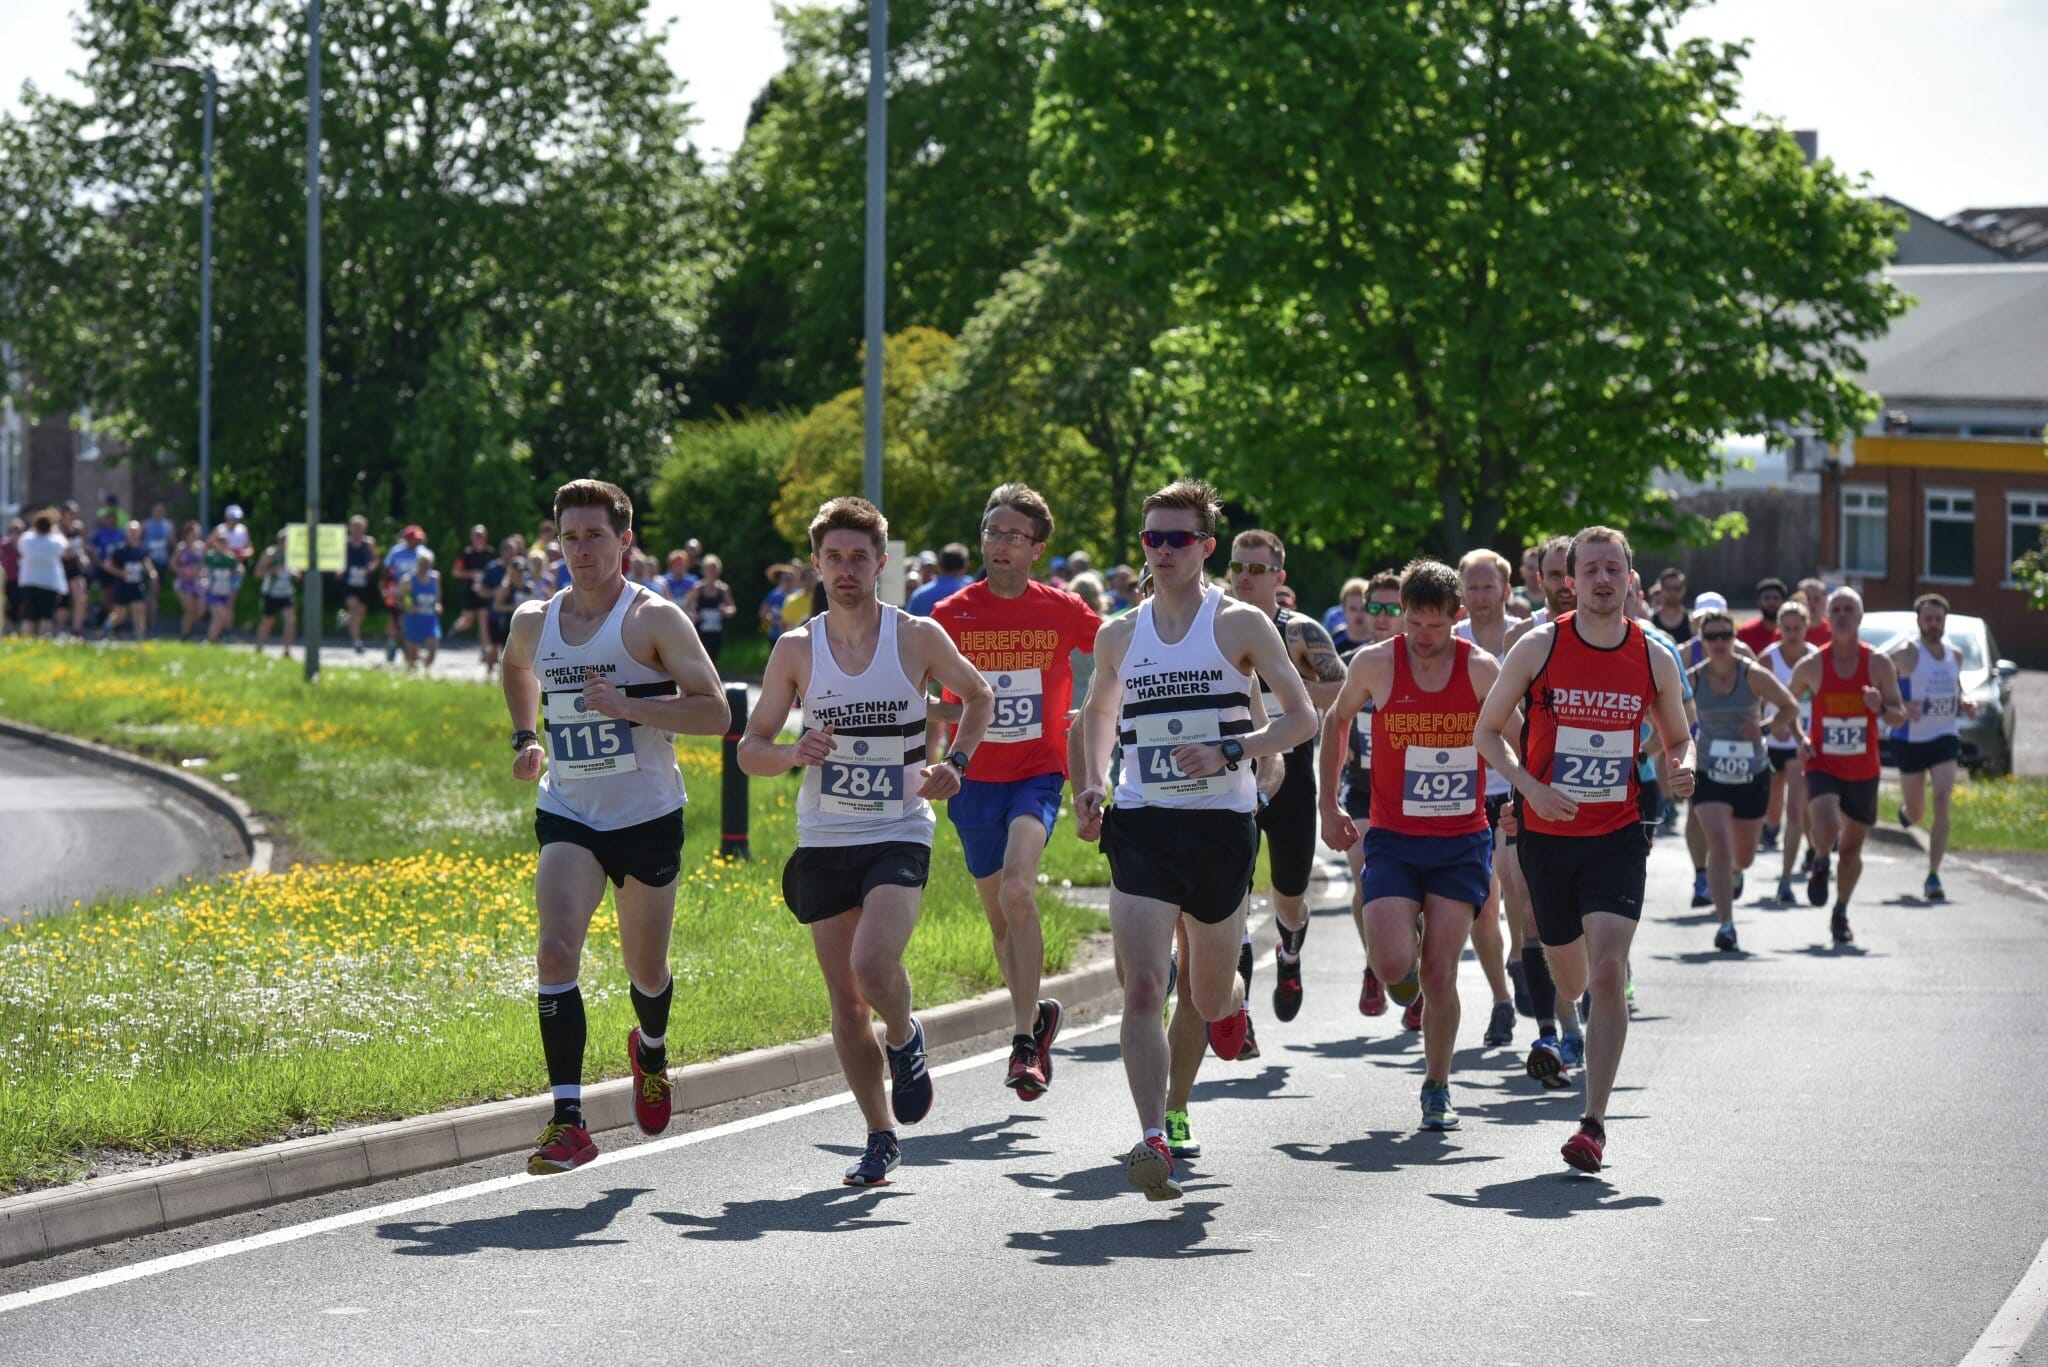 RUNNING | New start and finish location for Run Hereford